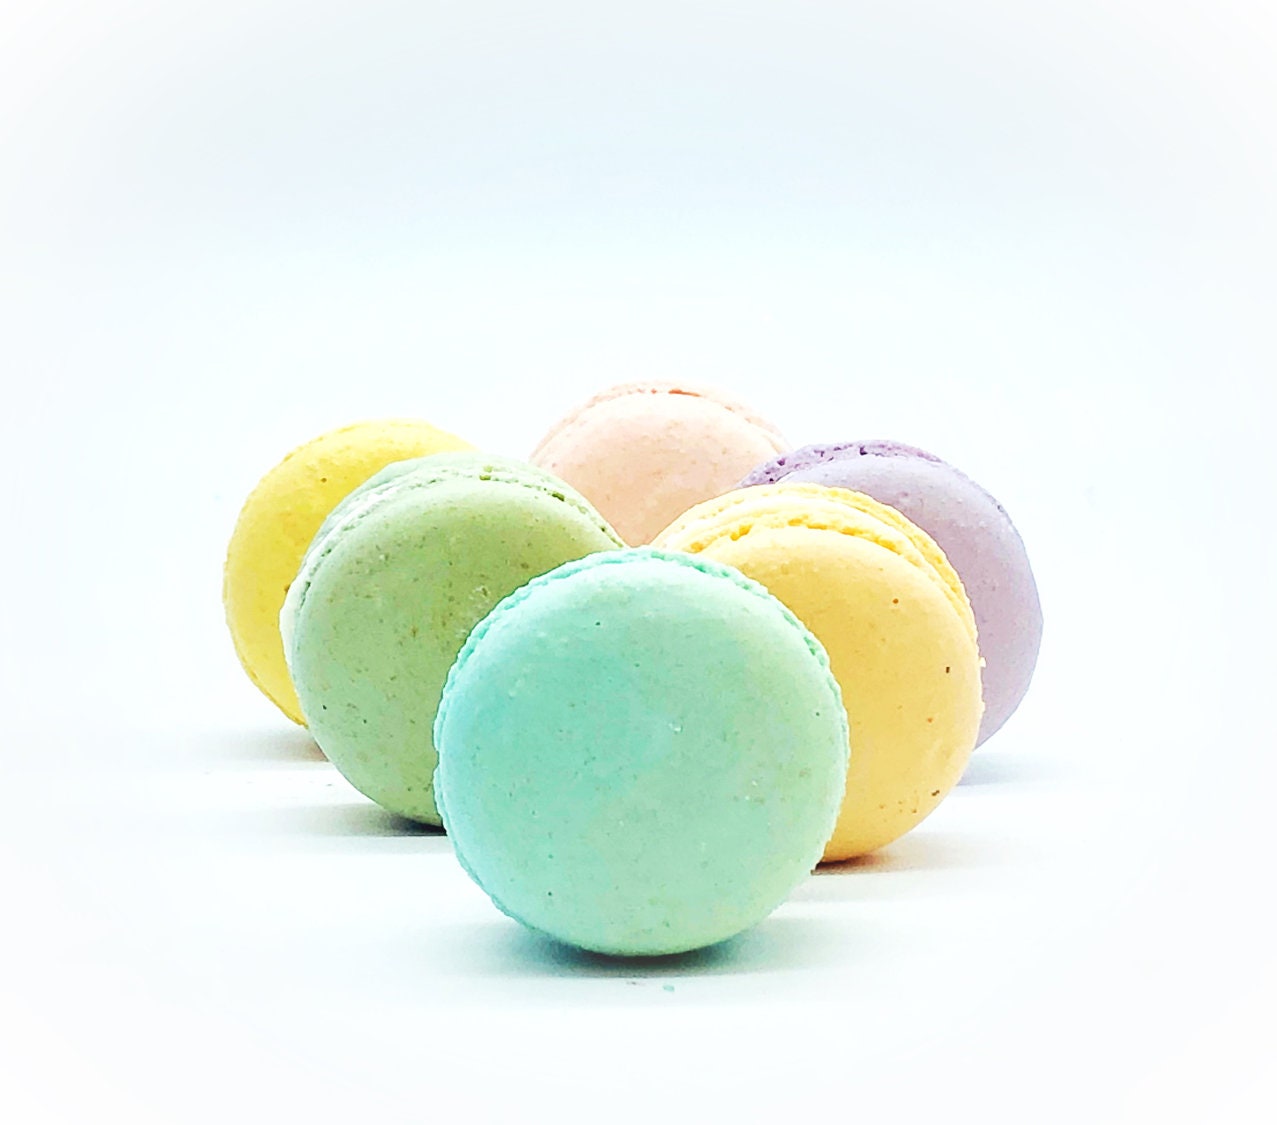 24 Pack Assorted Macaron, The Pastel Set | Great For Any Party, Celebration.